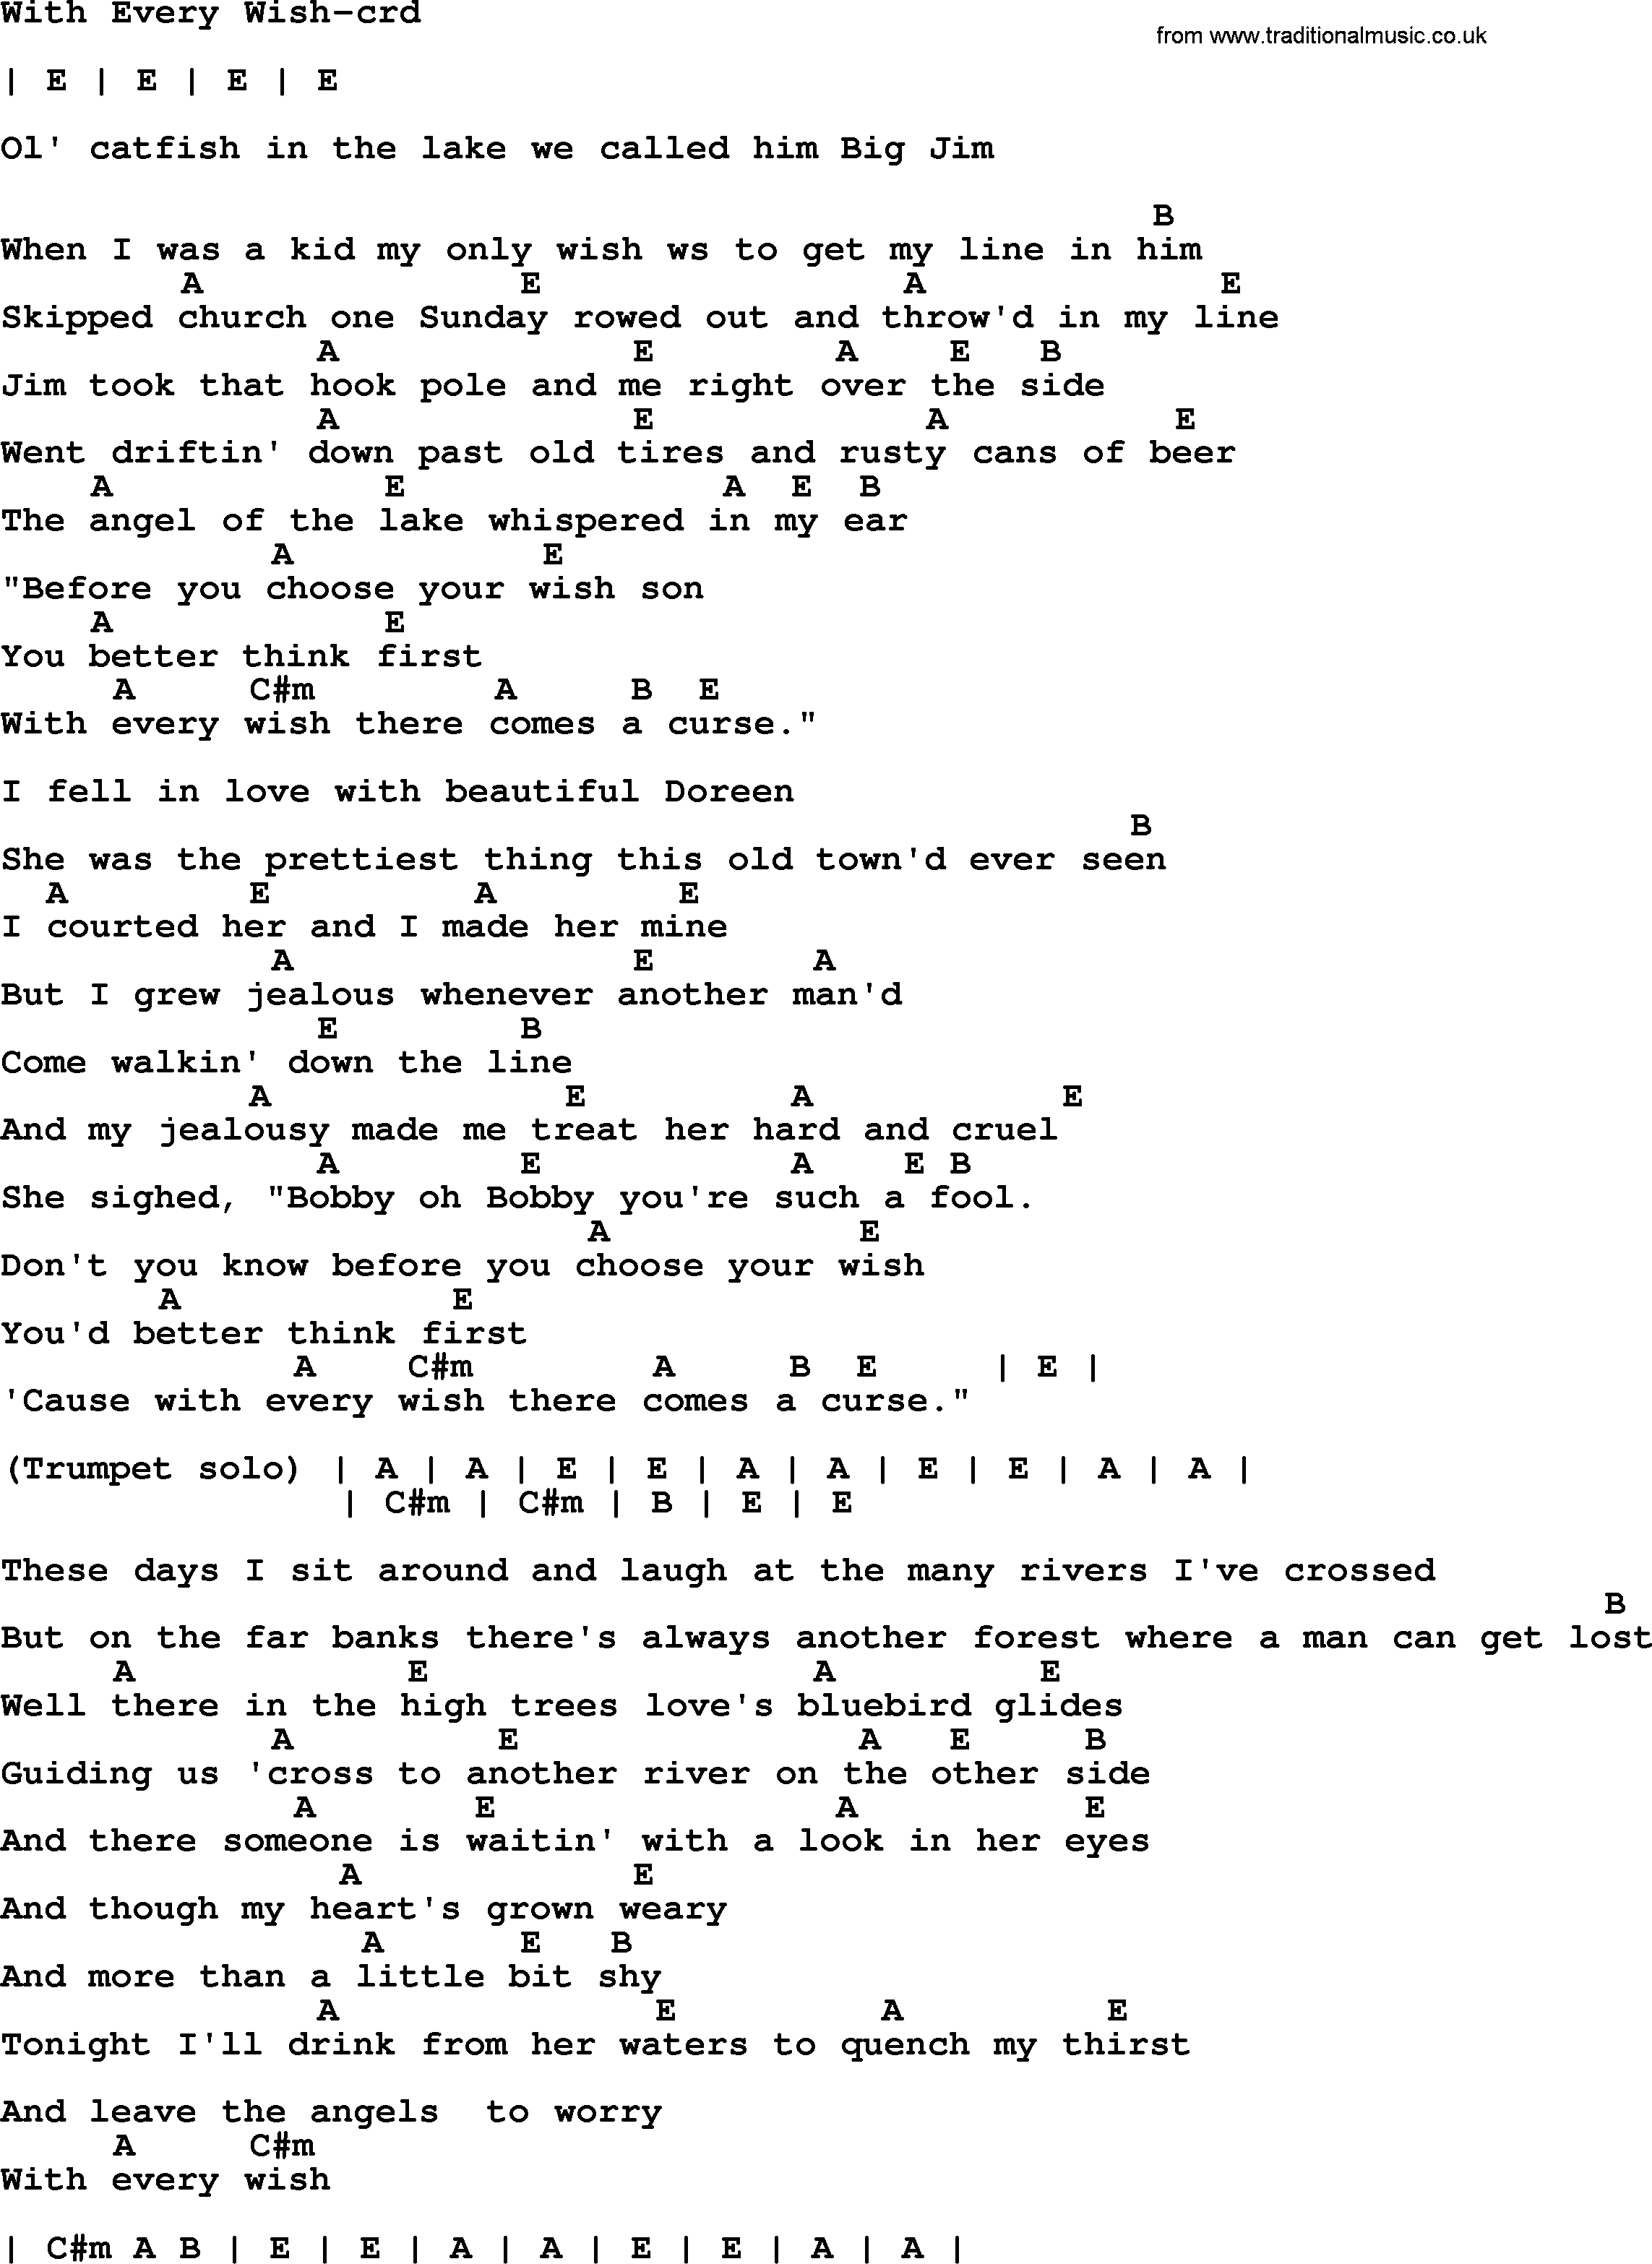 Bruce Springsteen song: With Every Wish, lyrics and chords